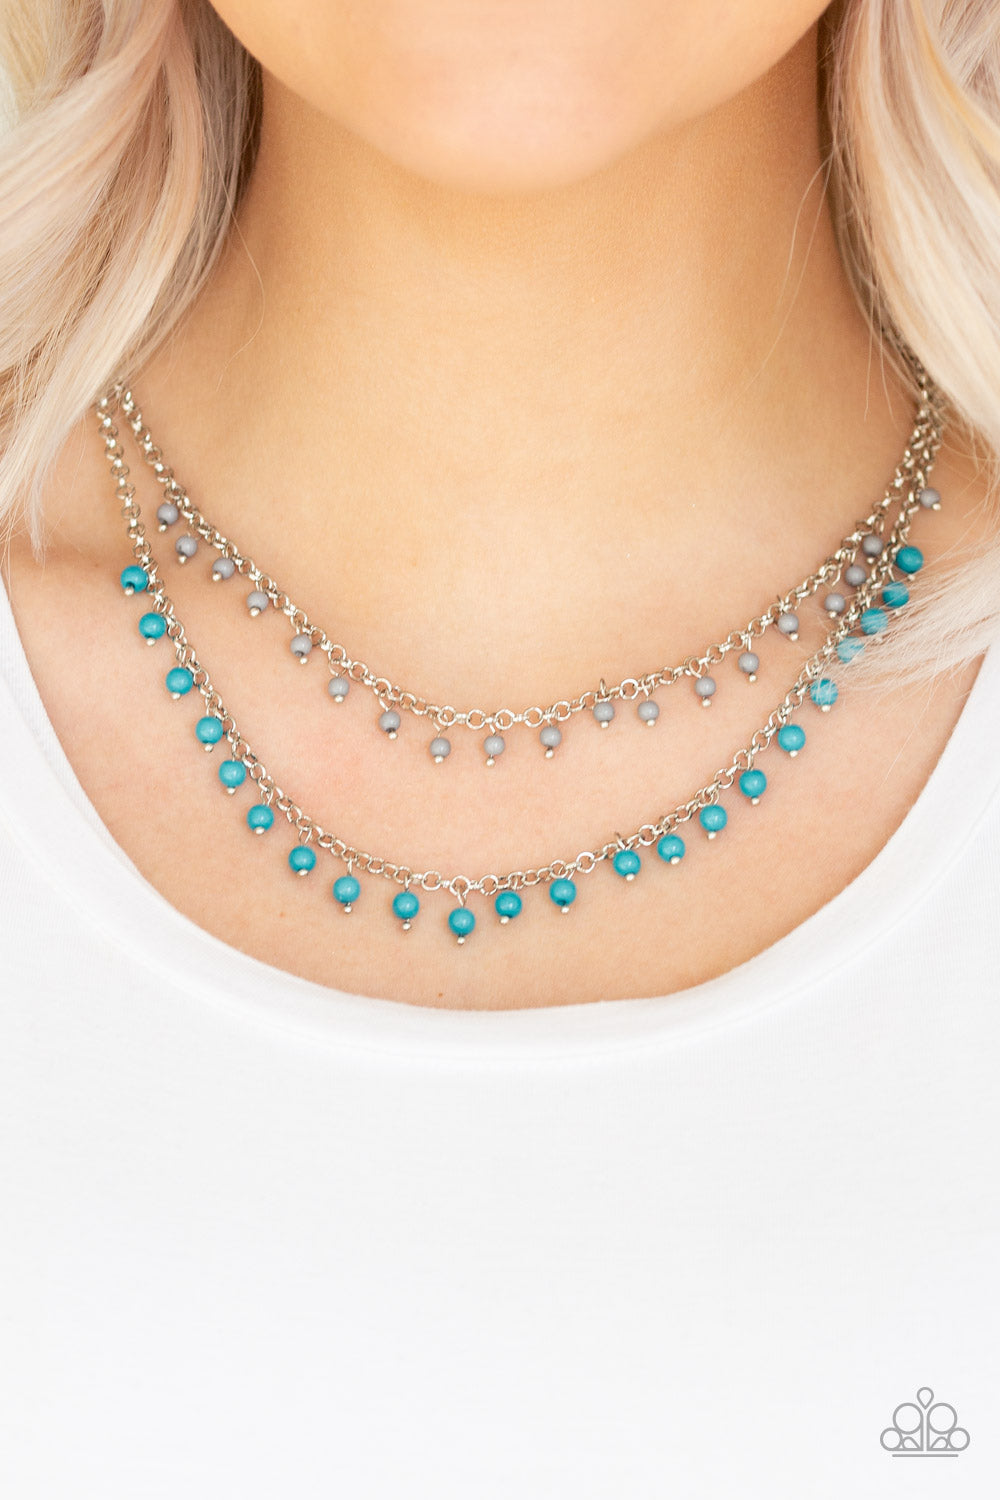 Paparazzi Necklace ~ Dainty Distraction - Blue